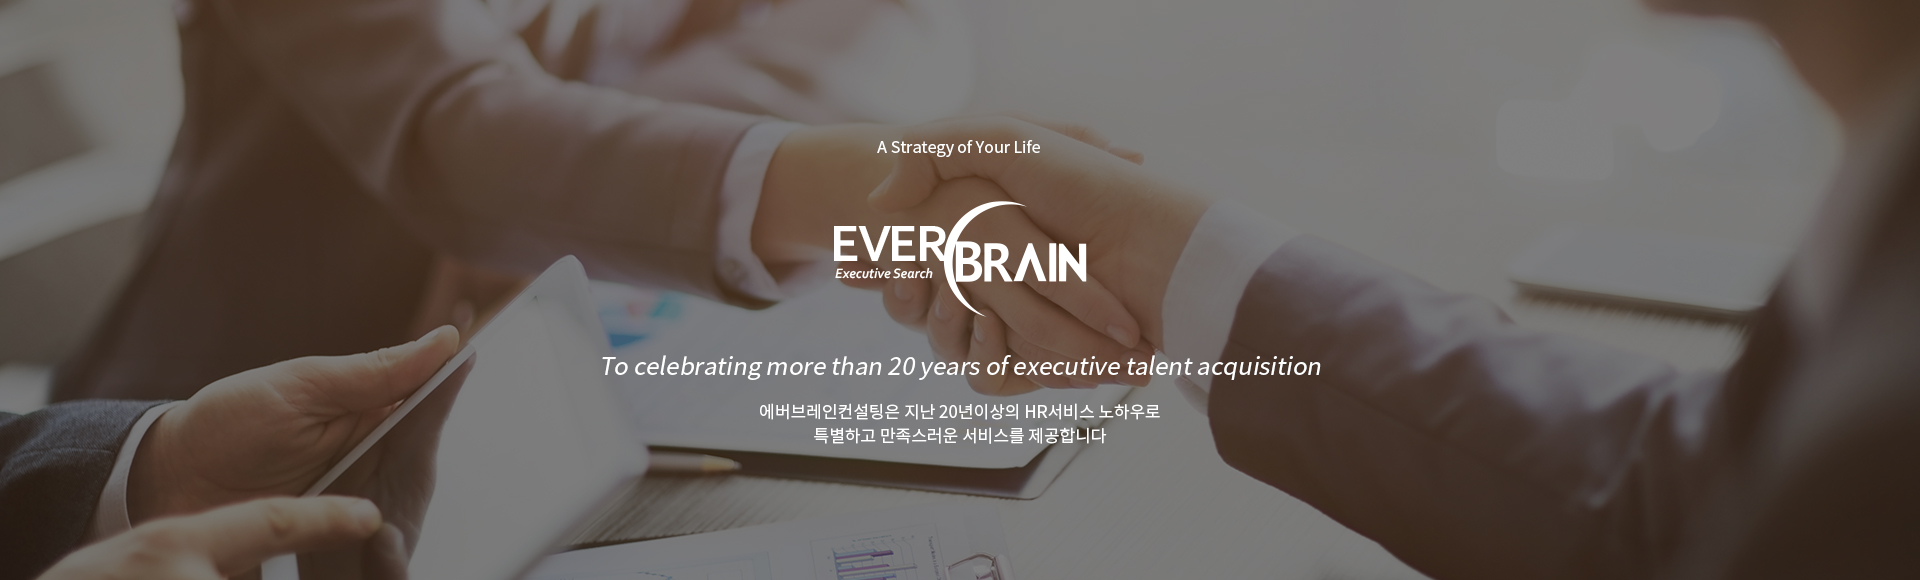 A Strategy of Your Life, EVERBRAIN. 극  20 HR Ͽ Ưϰ  񽺸 մϴ. To celebrating more than 20 years of executive talent acquisition with clients.